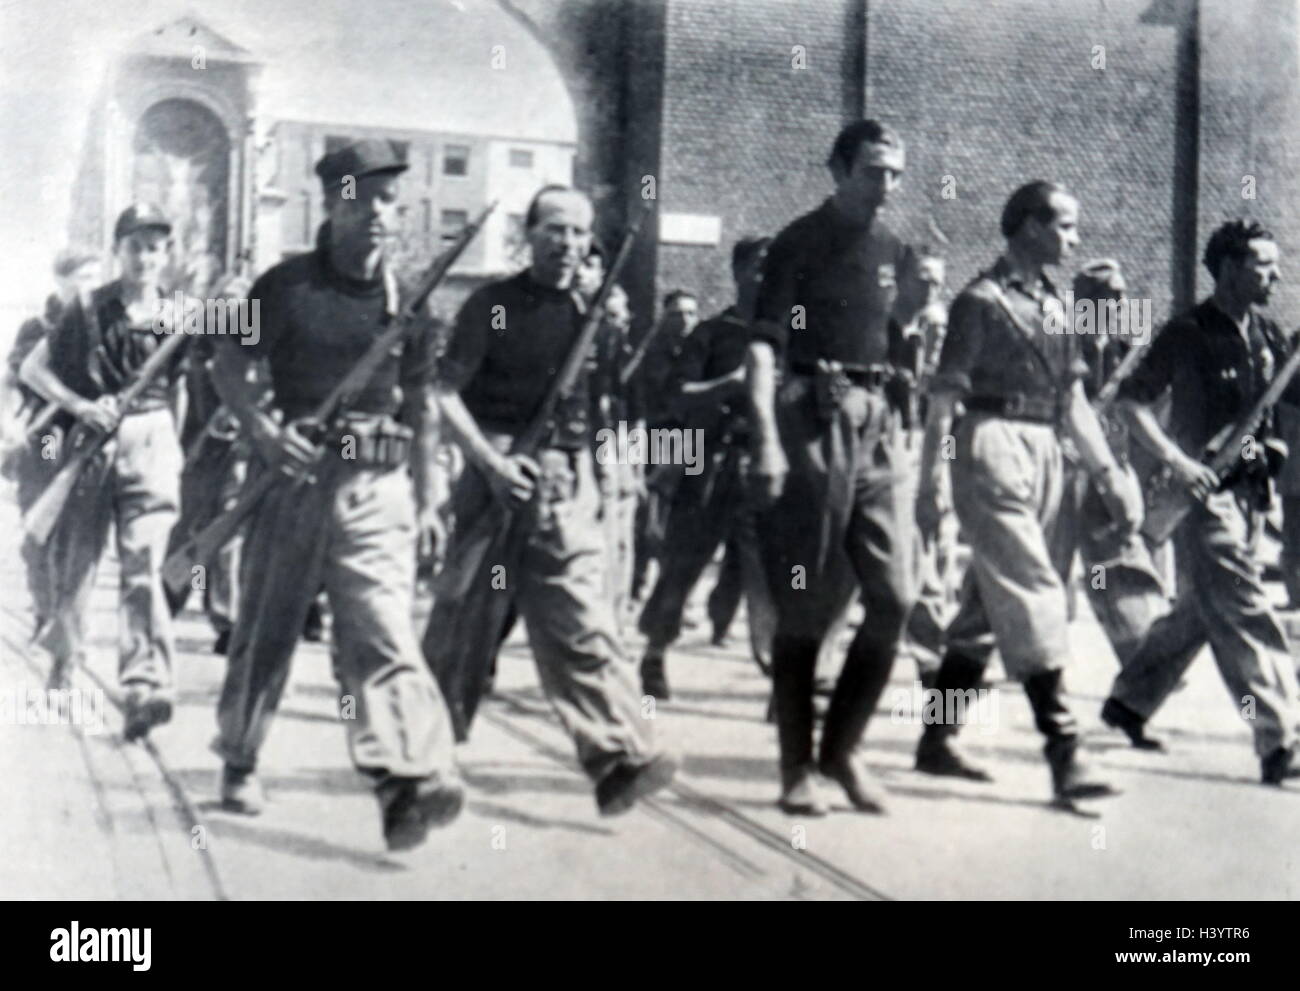 Photograph of the Black Brigade 'Aldo Resega' parading through the streets of Milan. Dated 20th Century Stock Photo